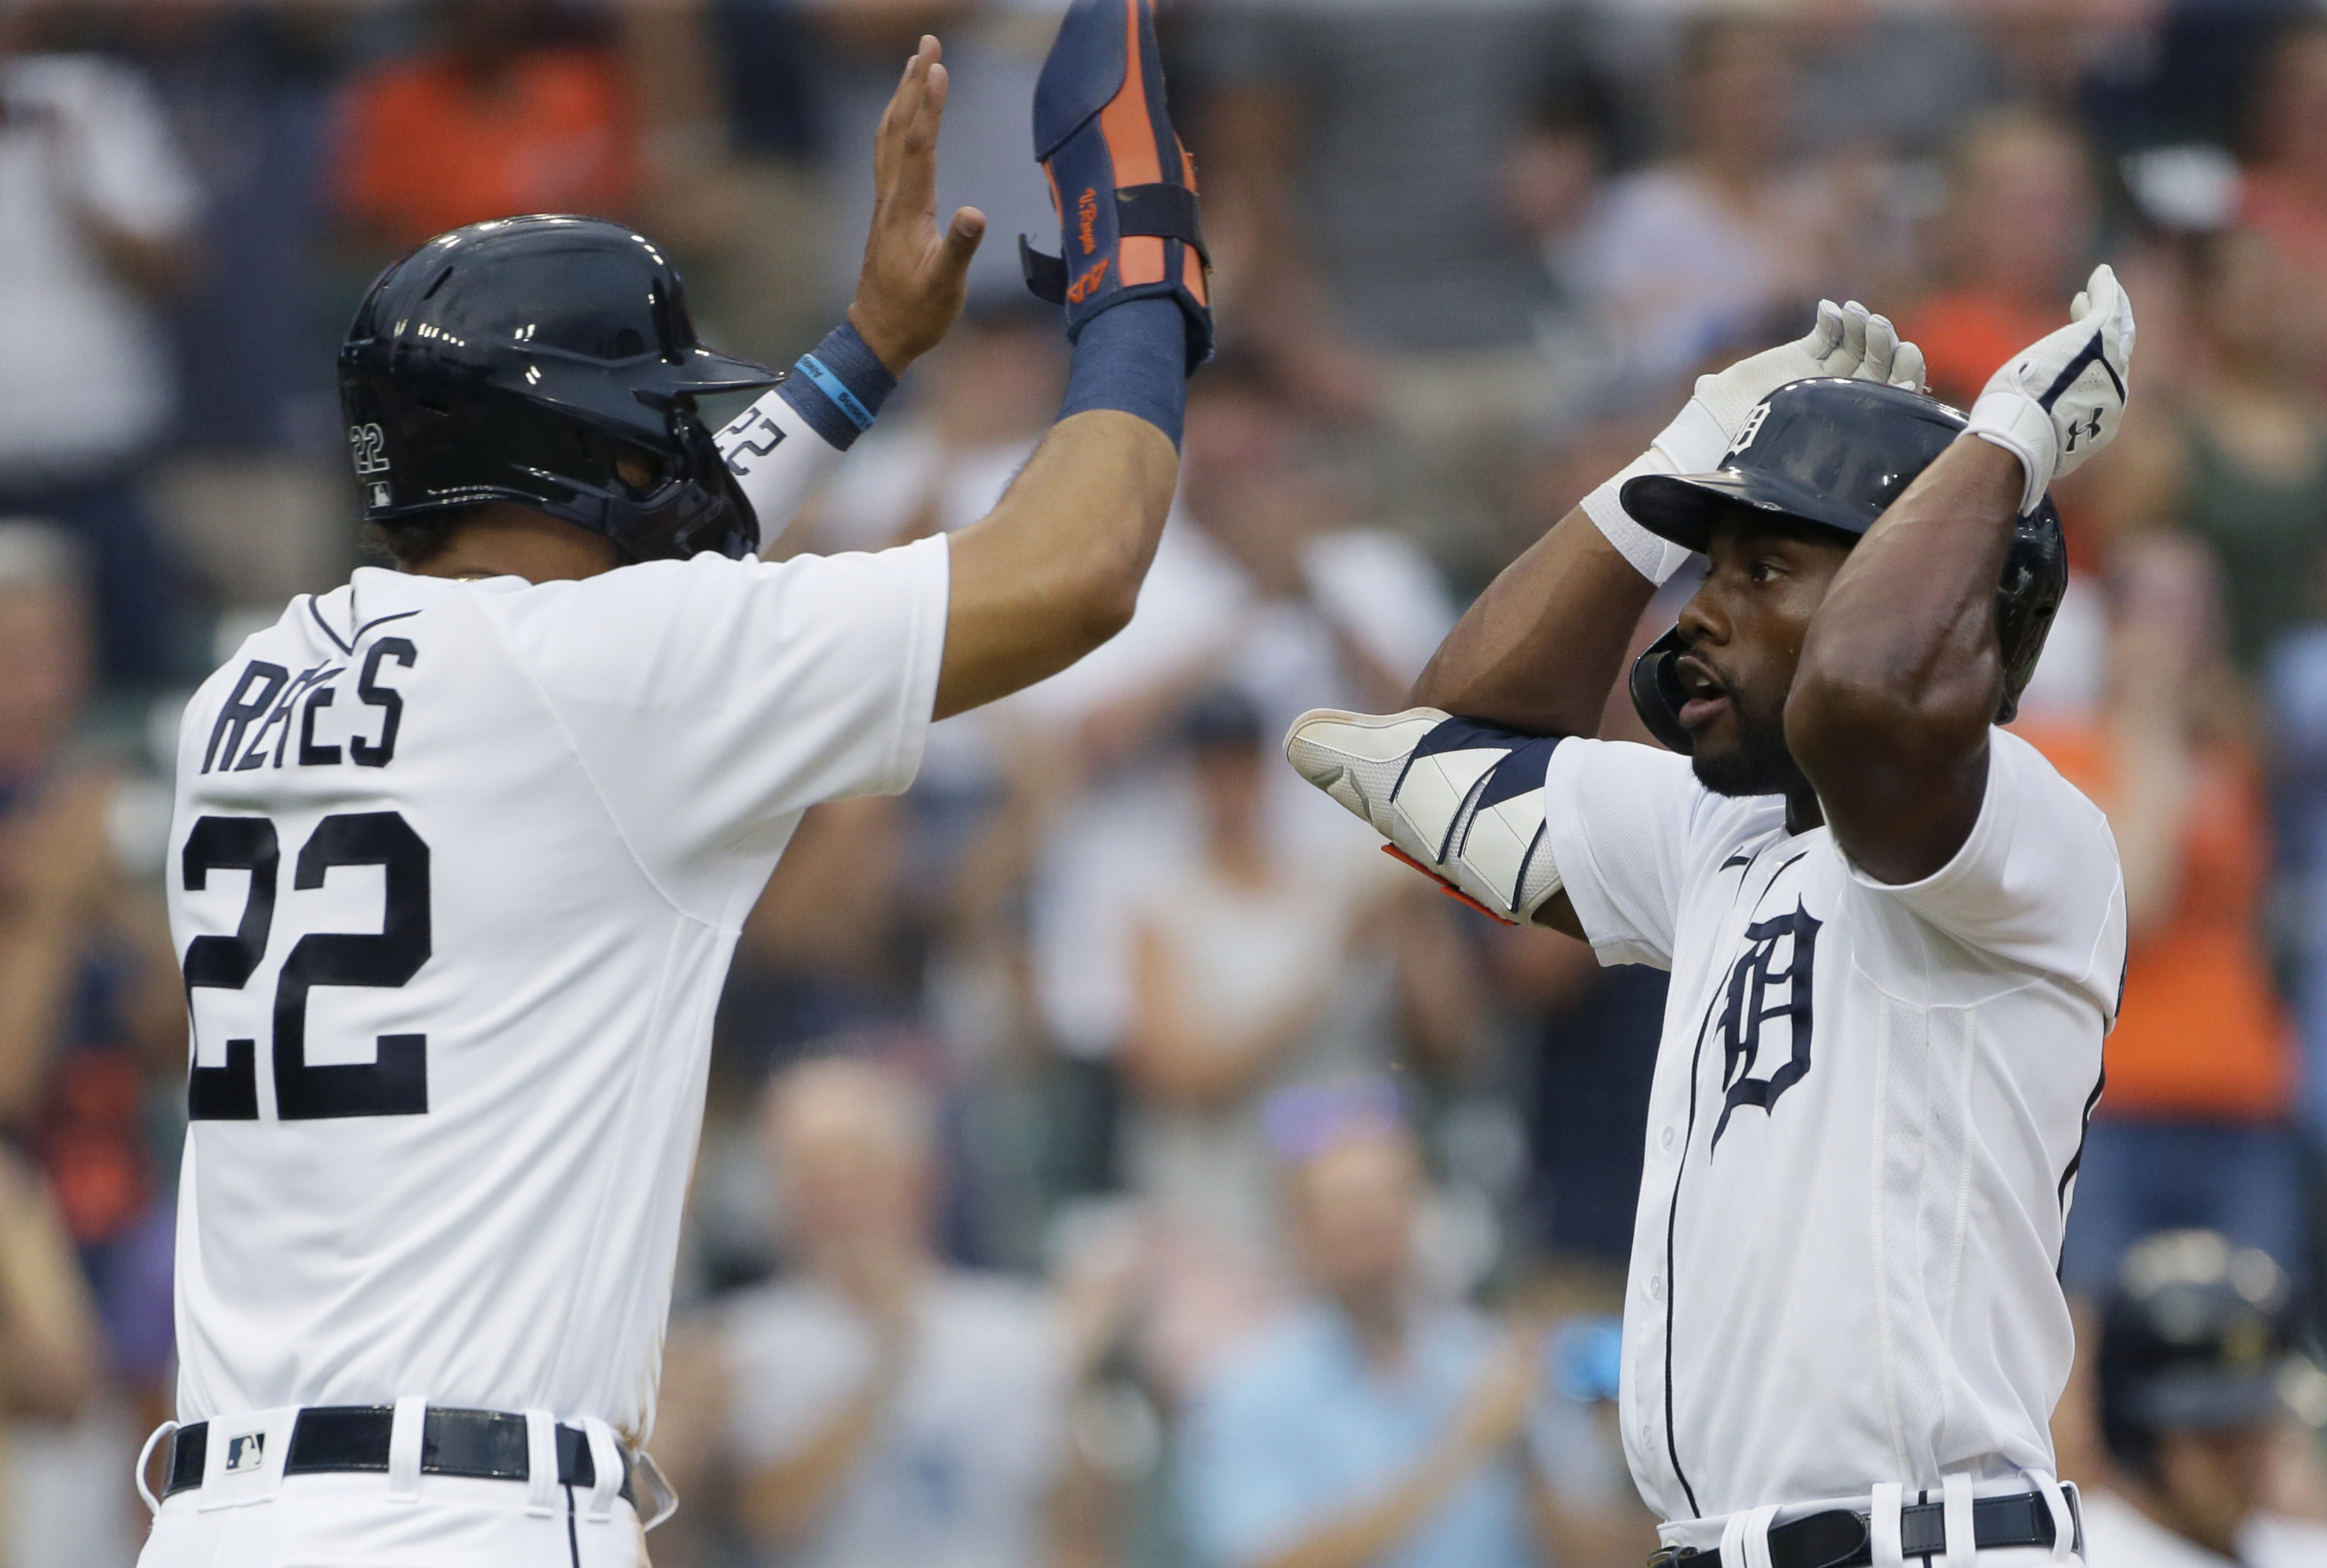 My 14 favorite stats from Detroit Tigers' 14-0 trouncing of Texas Rangers